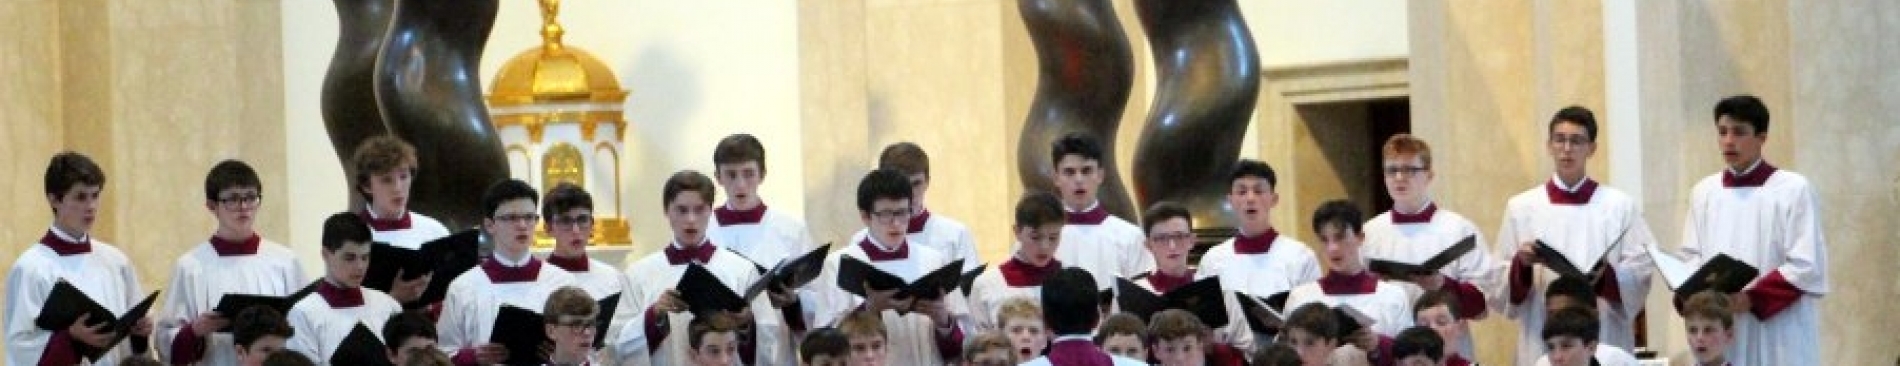 London Schola Offers Musical Oratory in California Chapel